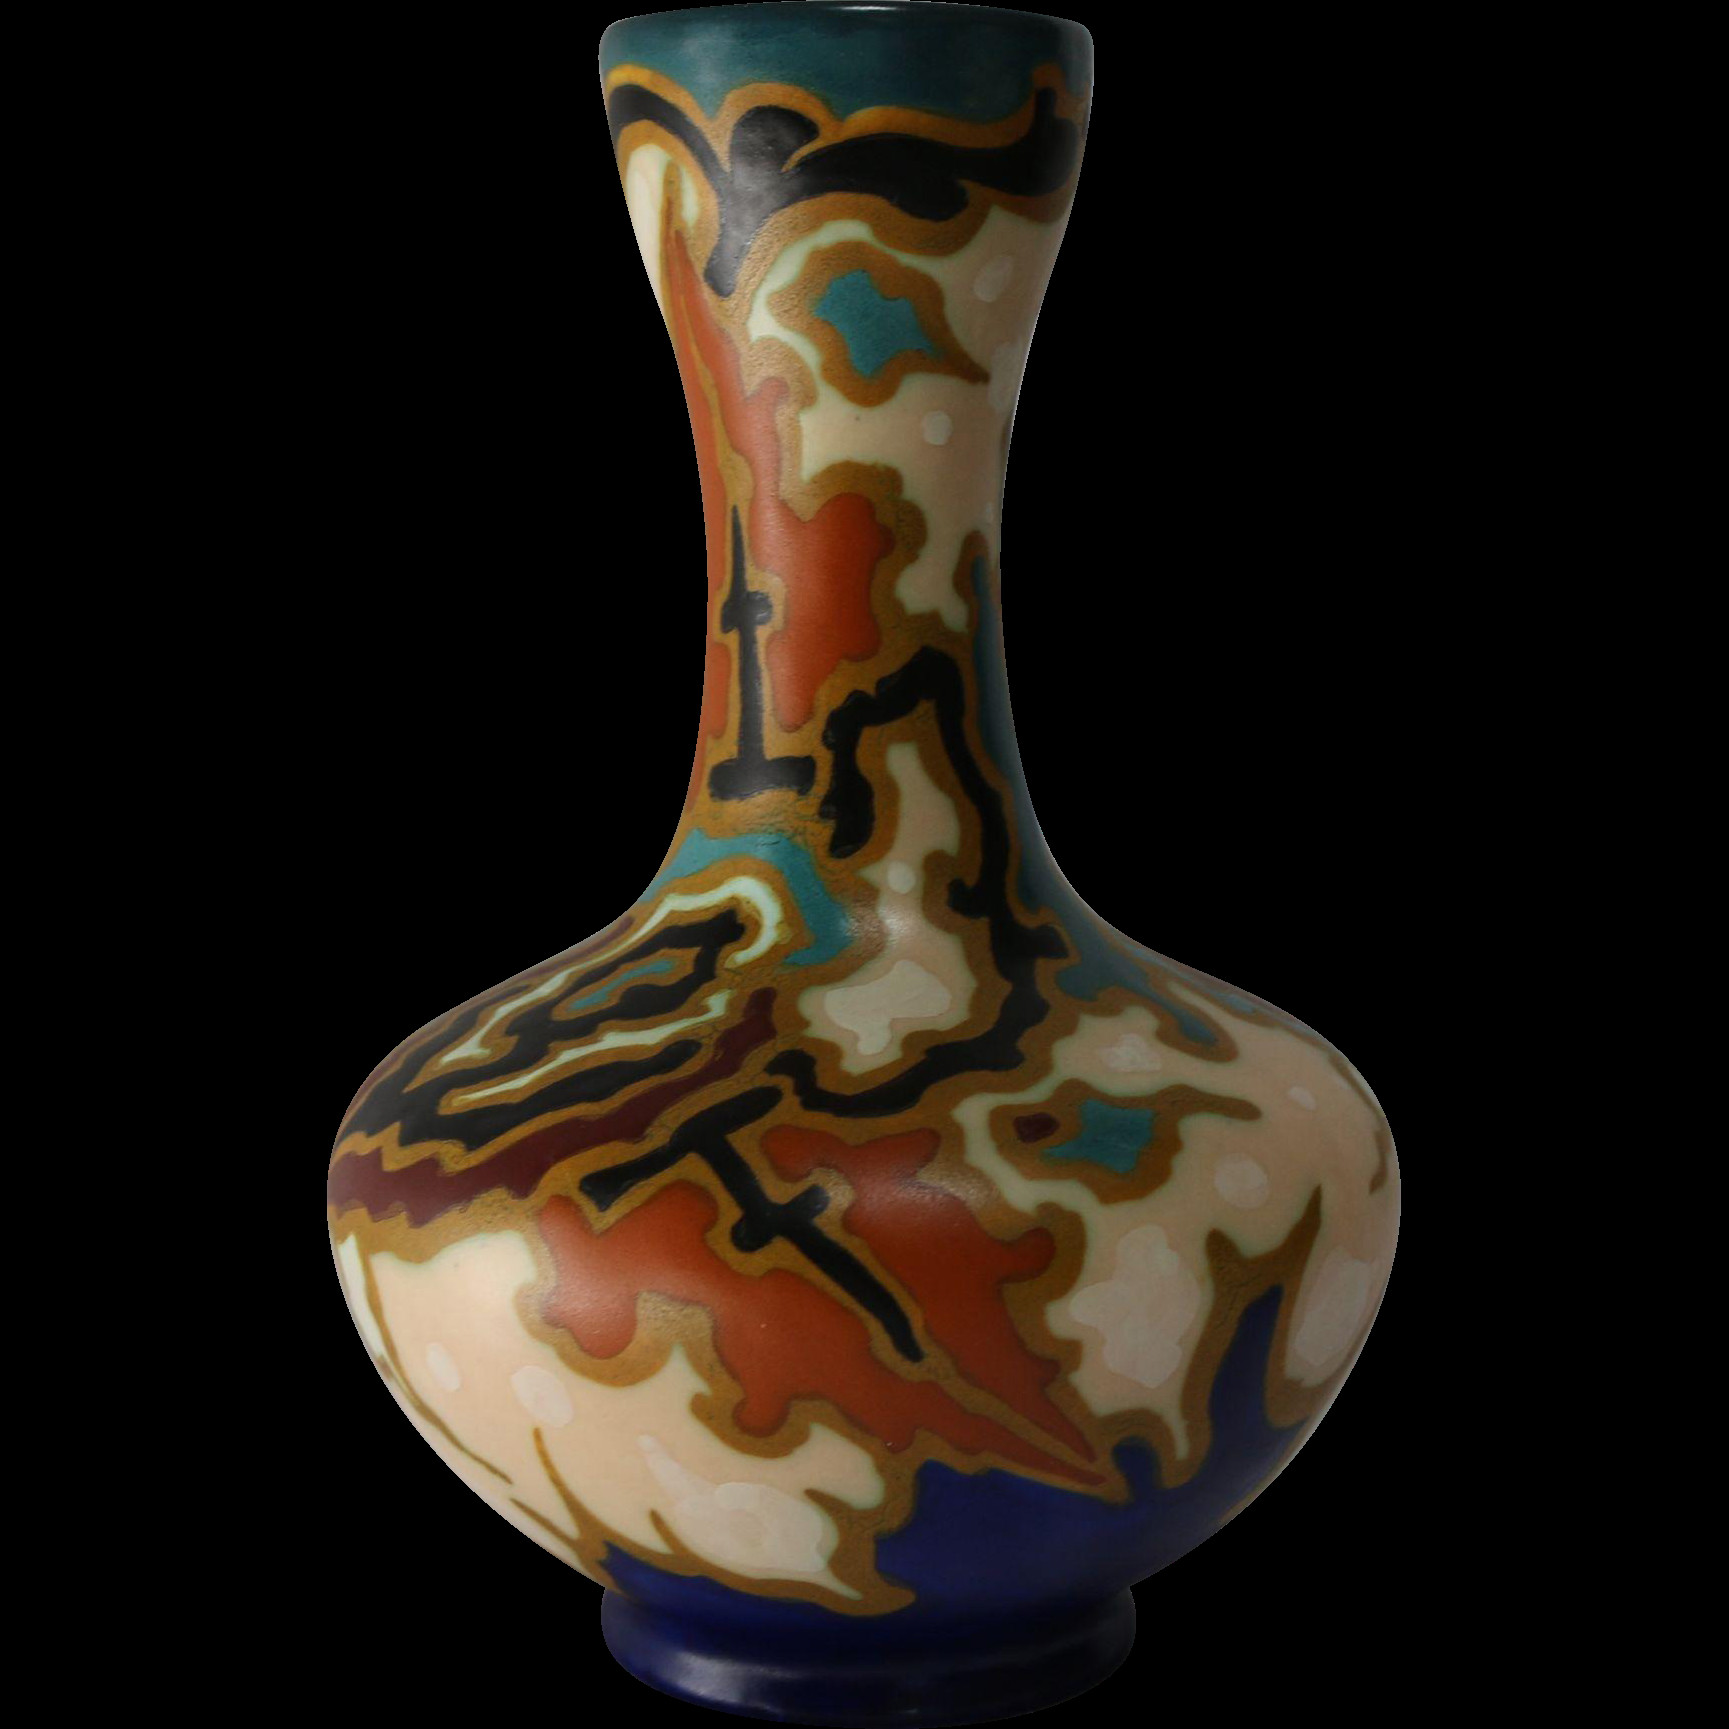 15 Amazing Royal Doulton Vases 1920 2024 free download royal doulton vases 1920 of gouda art pottery vase by regina circa 1940s gouda pottery throughout the great bold patterns of 1920s gouda art pottery is what still makes it appealing today th